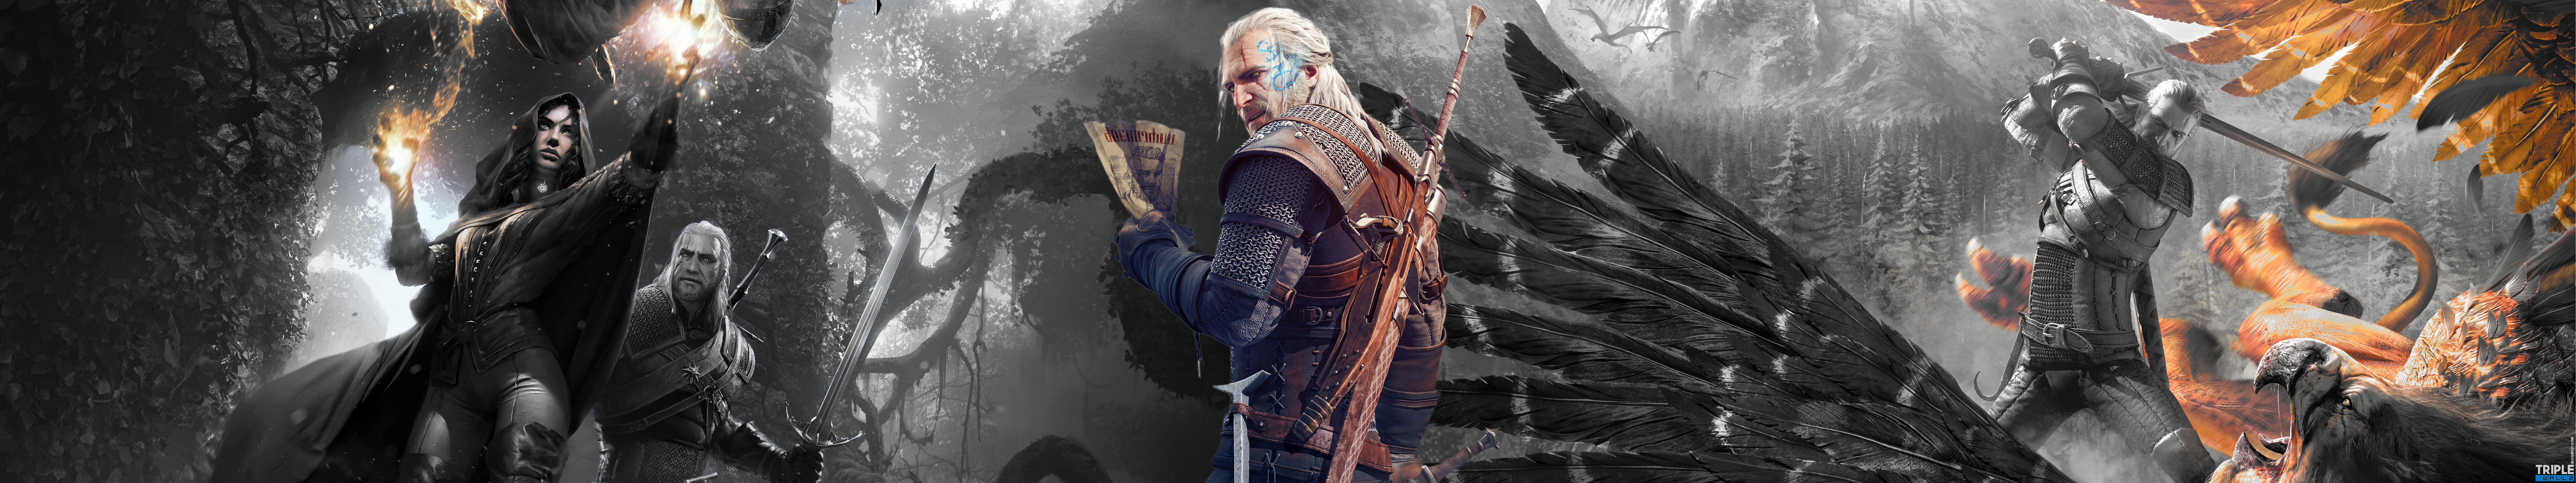 The Witcher 3 by Mohz